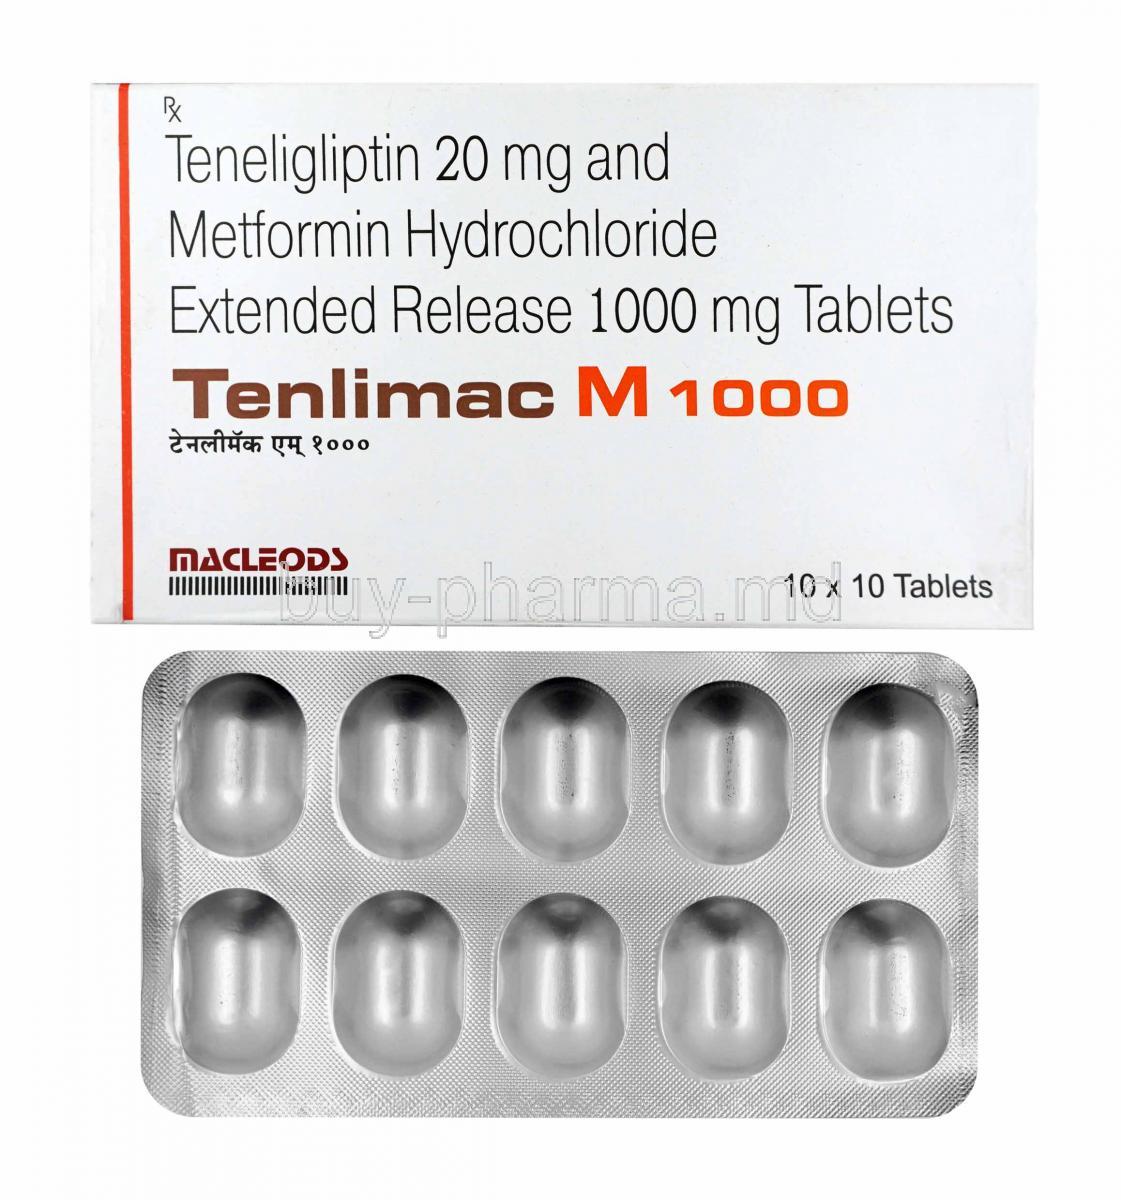 Tenlimac M, Metformin and Teneligliptin 1000mg box and tablets